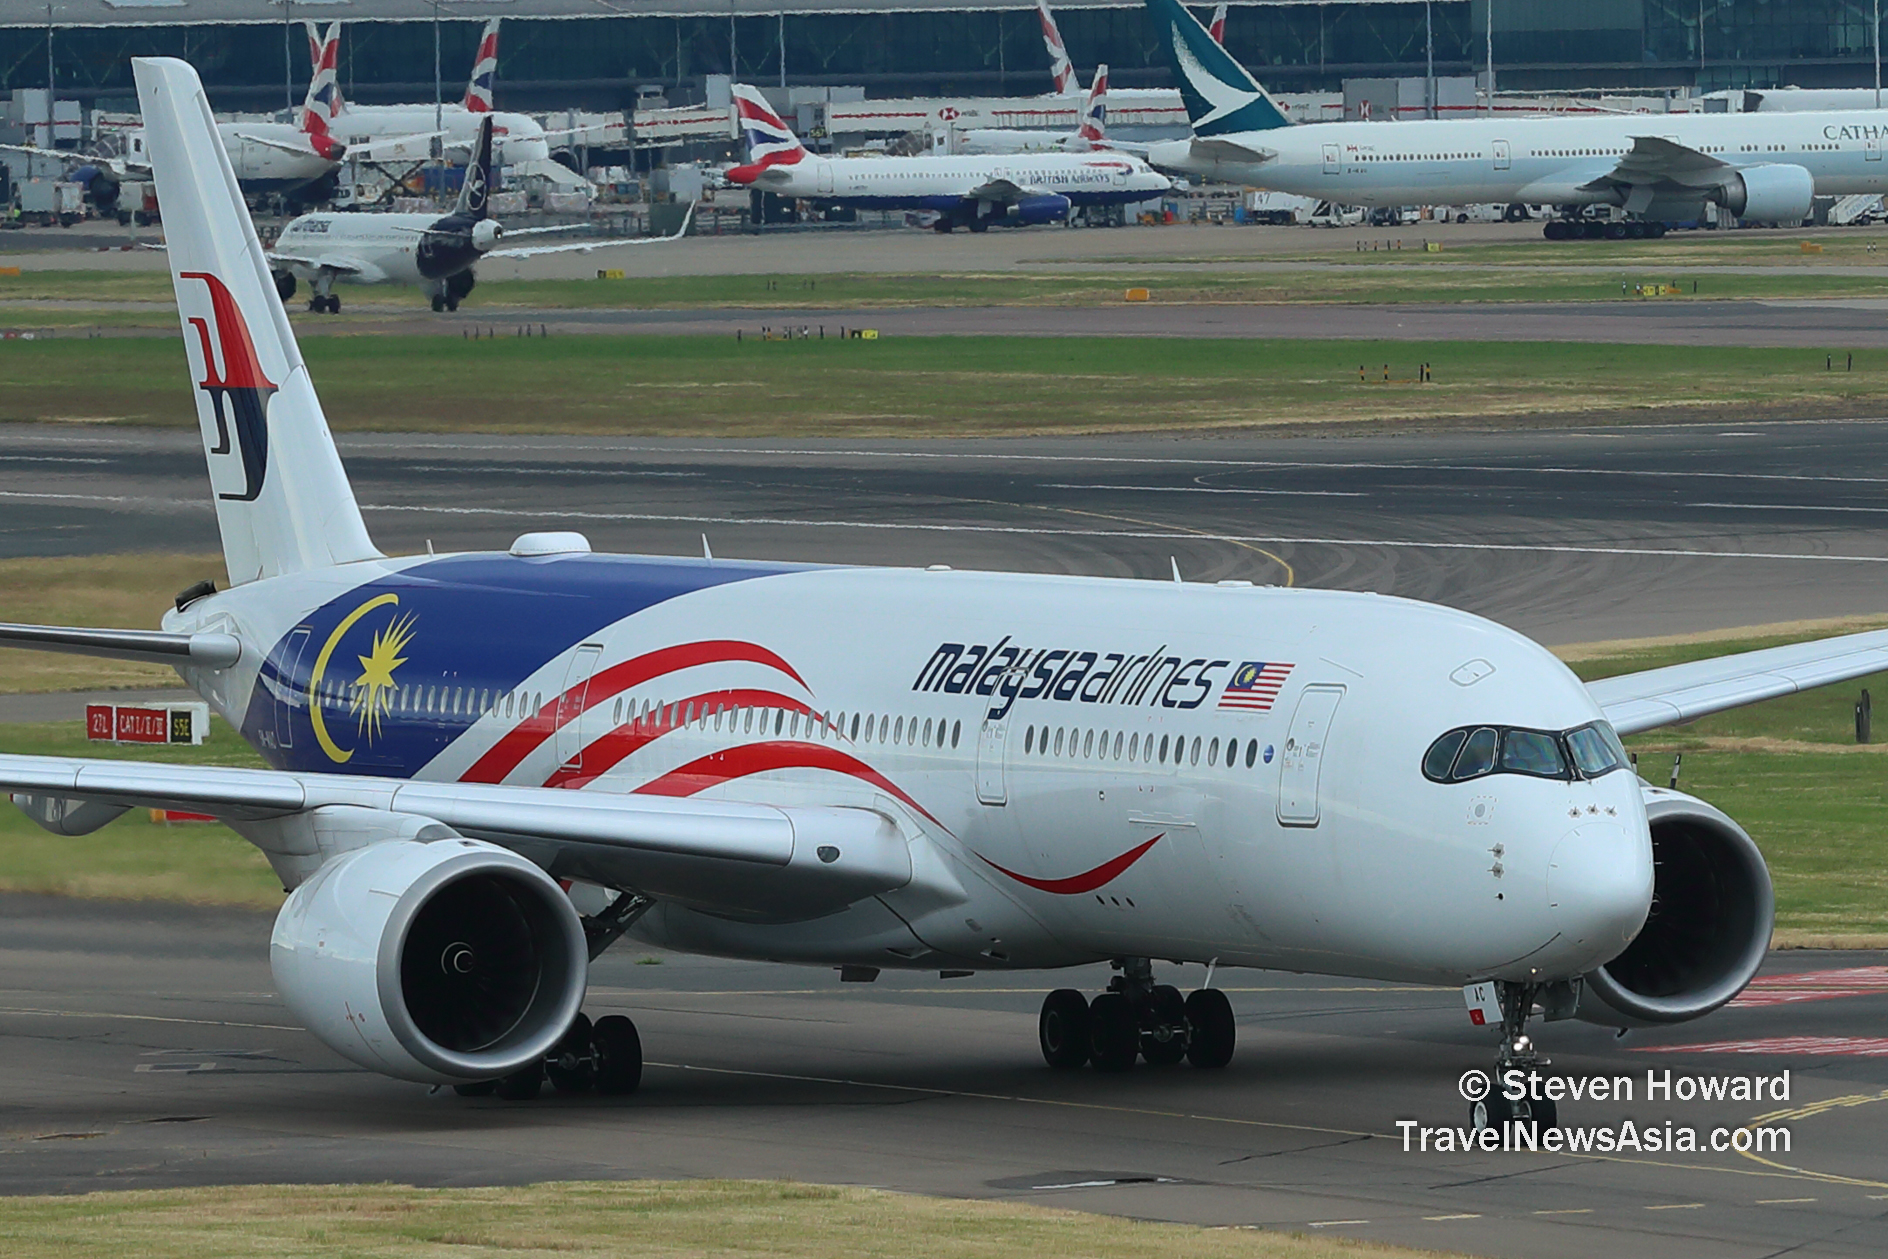 Malaysia Airlines A350-900 reg: 9M-MAC at LHR. Picture by Steven Howard of TravelNewsAsia.com Click to enlarge.